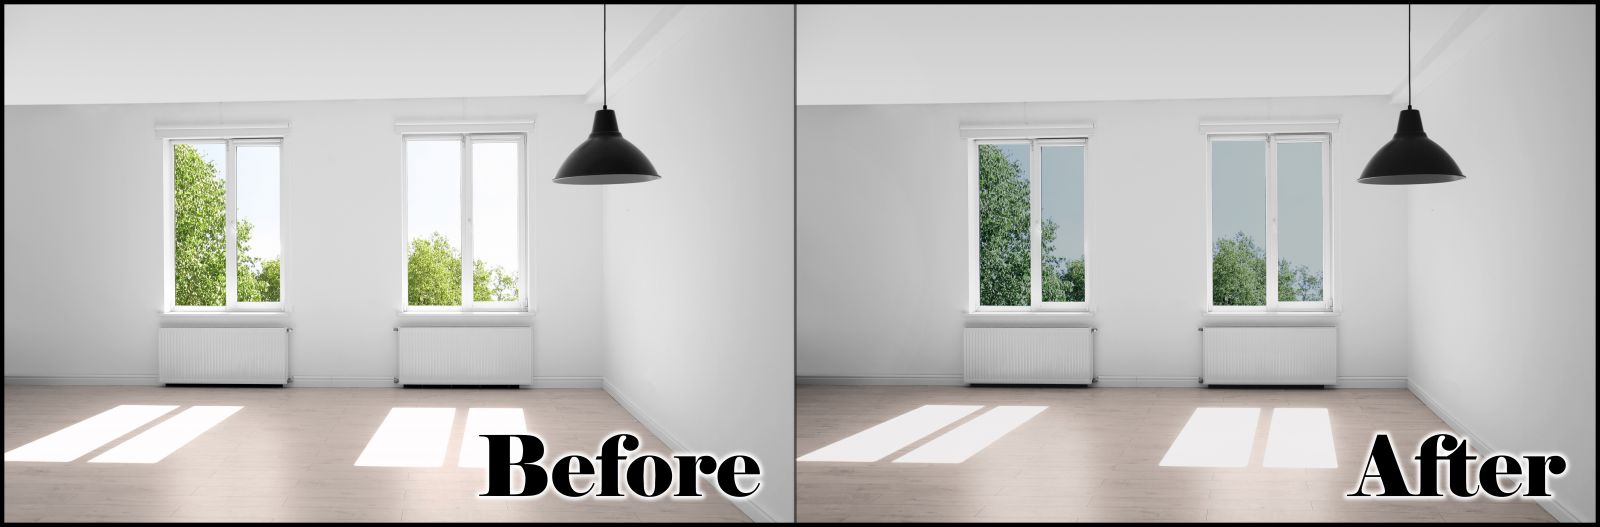 sunlight coming in windows before and after using window film